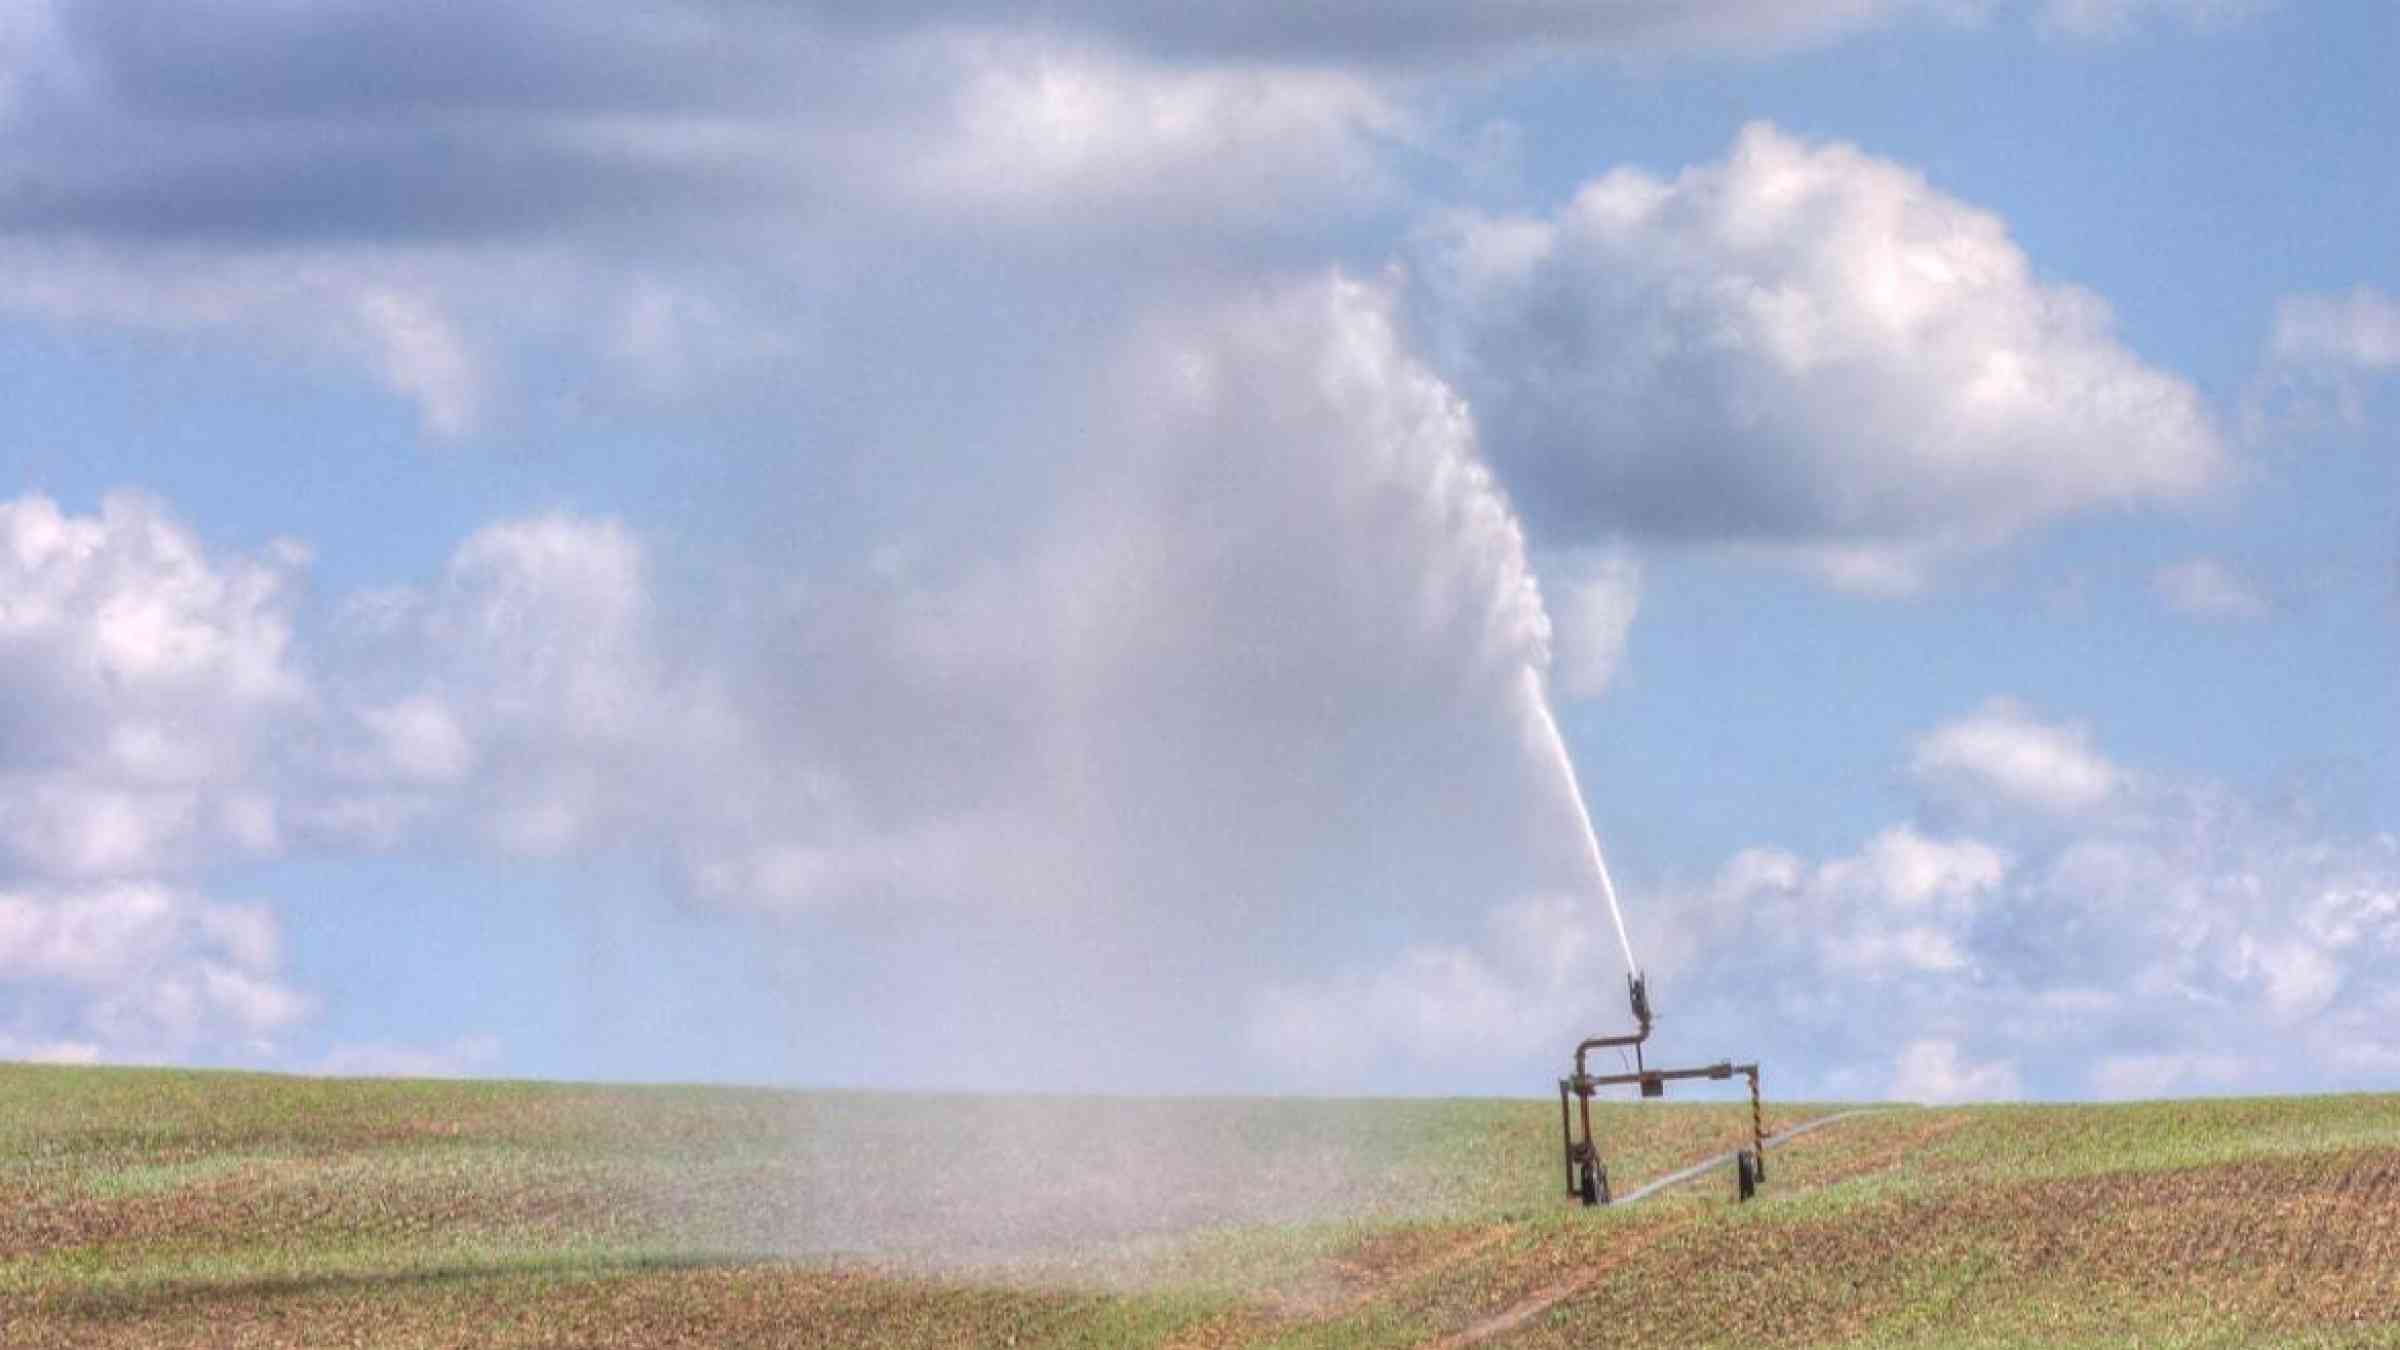 Irrigation of a field